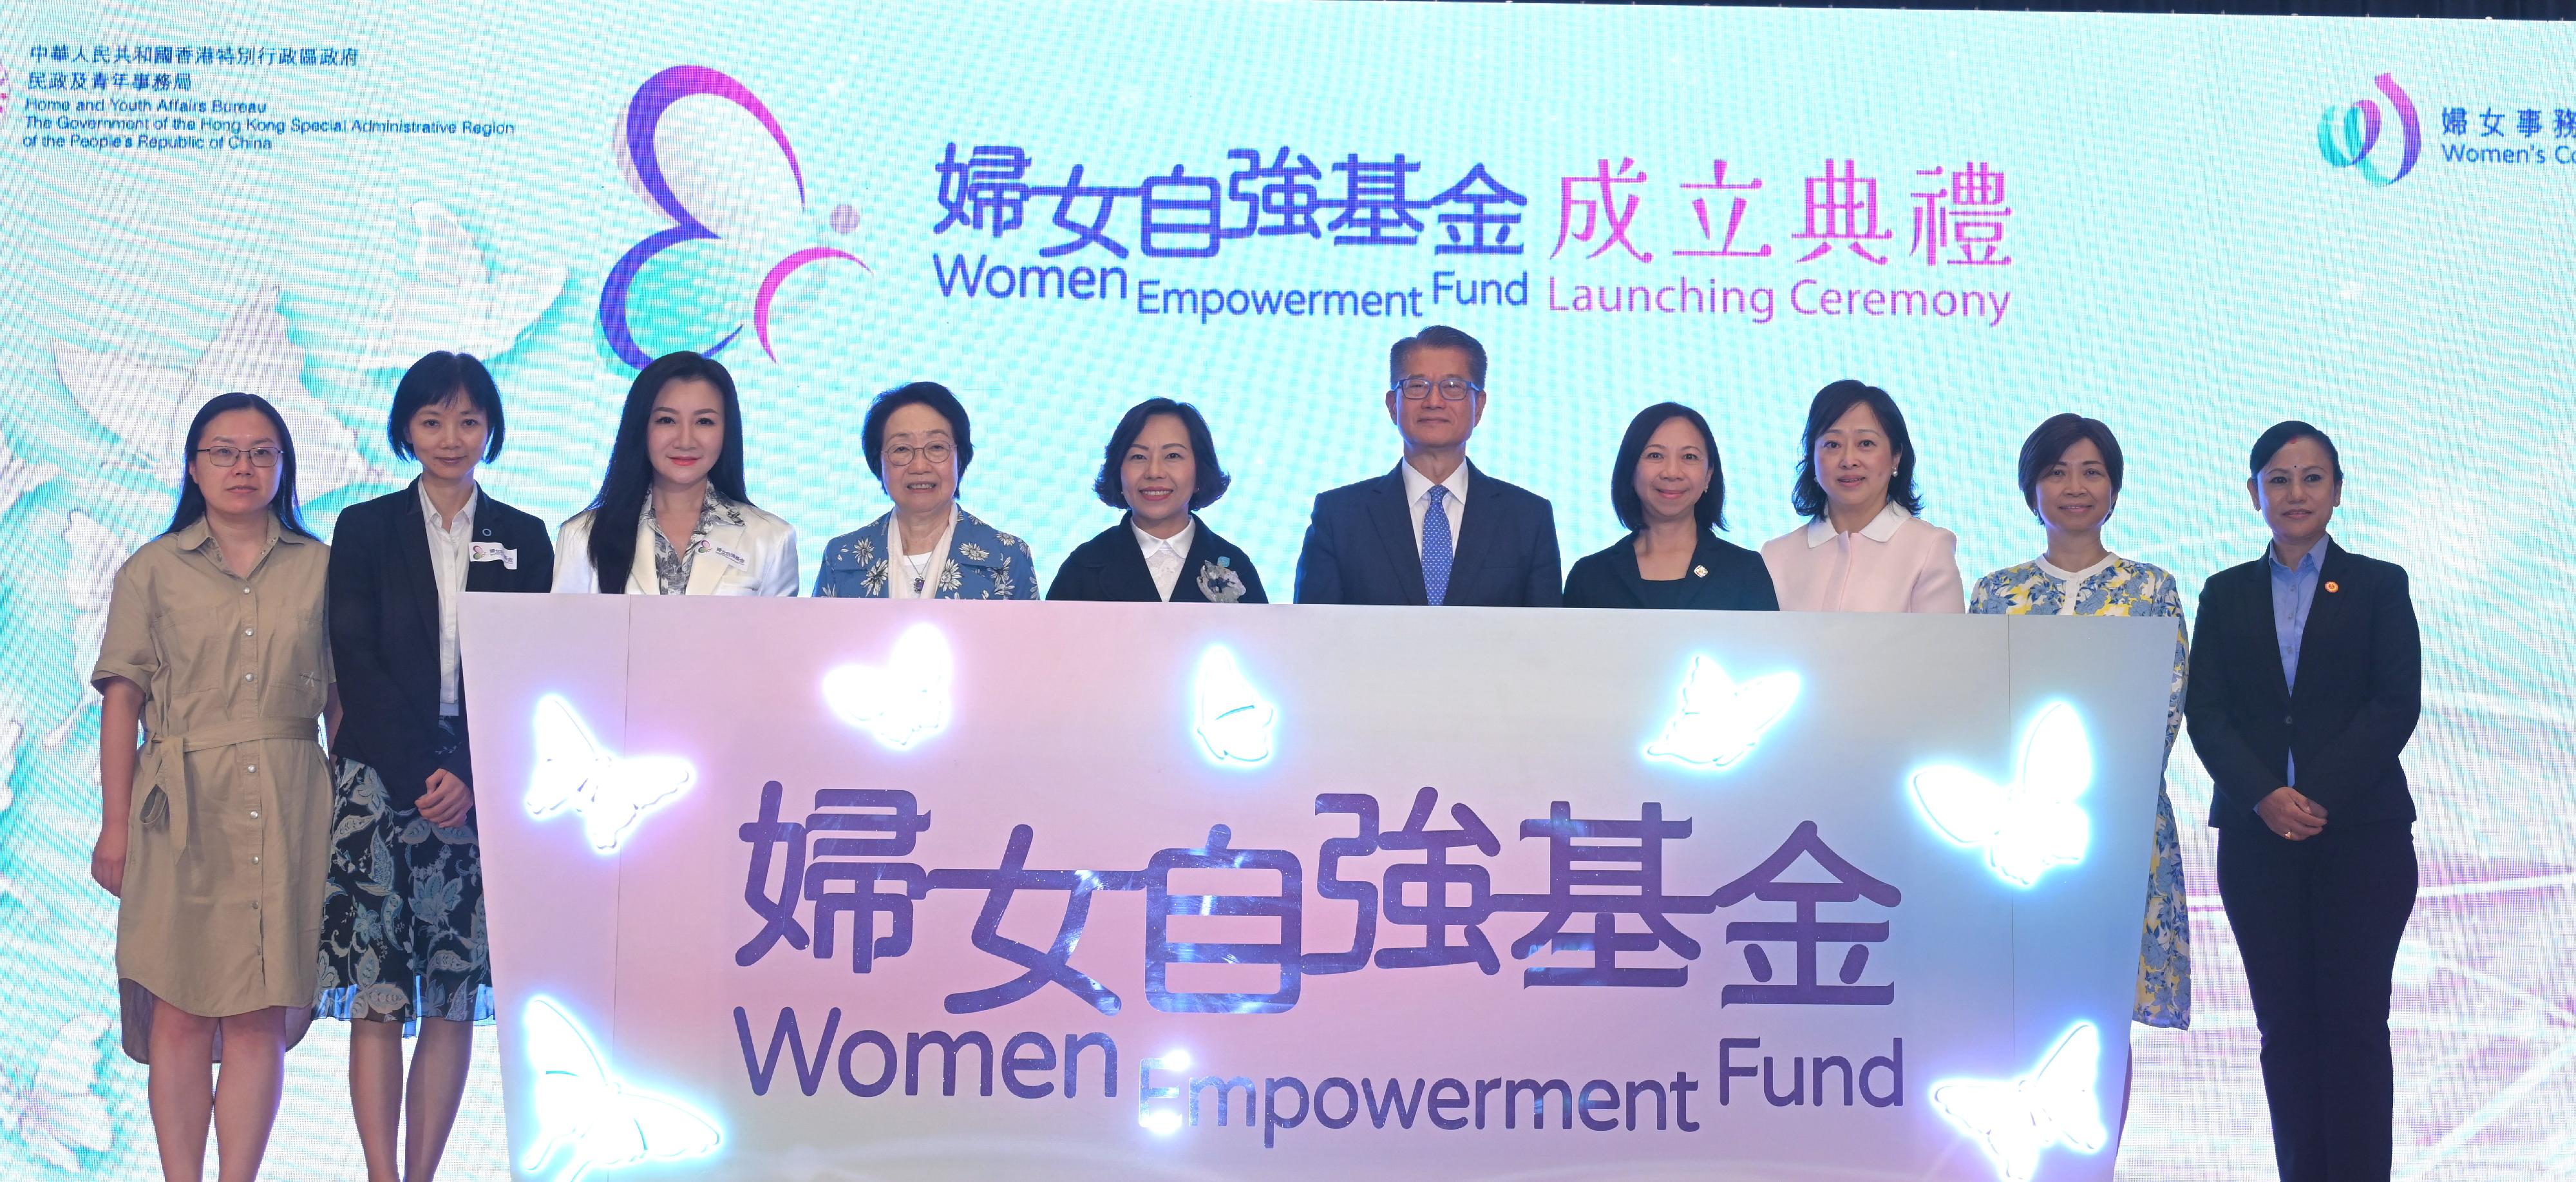 The Financial Secretary, Mr Paul Chan, attended the Women Empowerment Fund Launching Ceremony today (June 8). Photo shows (from fourth left) the Chairperson of the Women's Commission, Ms Chan Yuen-han; the Secretary for Home and Youth Affairs, Miss Alice Mak; Mr Chan; the Permanent Secretary for Home and Youth Affairs, Ms Shirley Lam, and other guests at the ceremony.